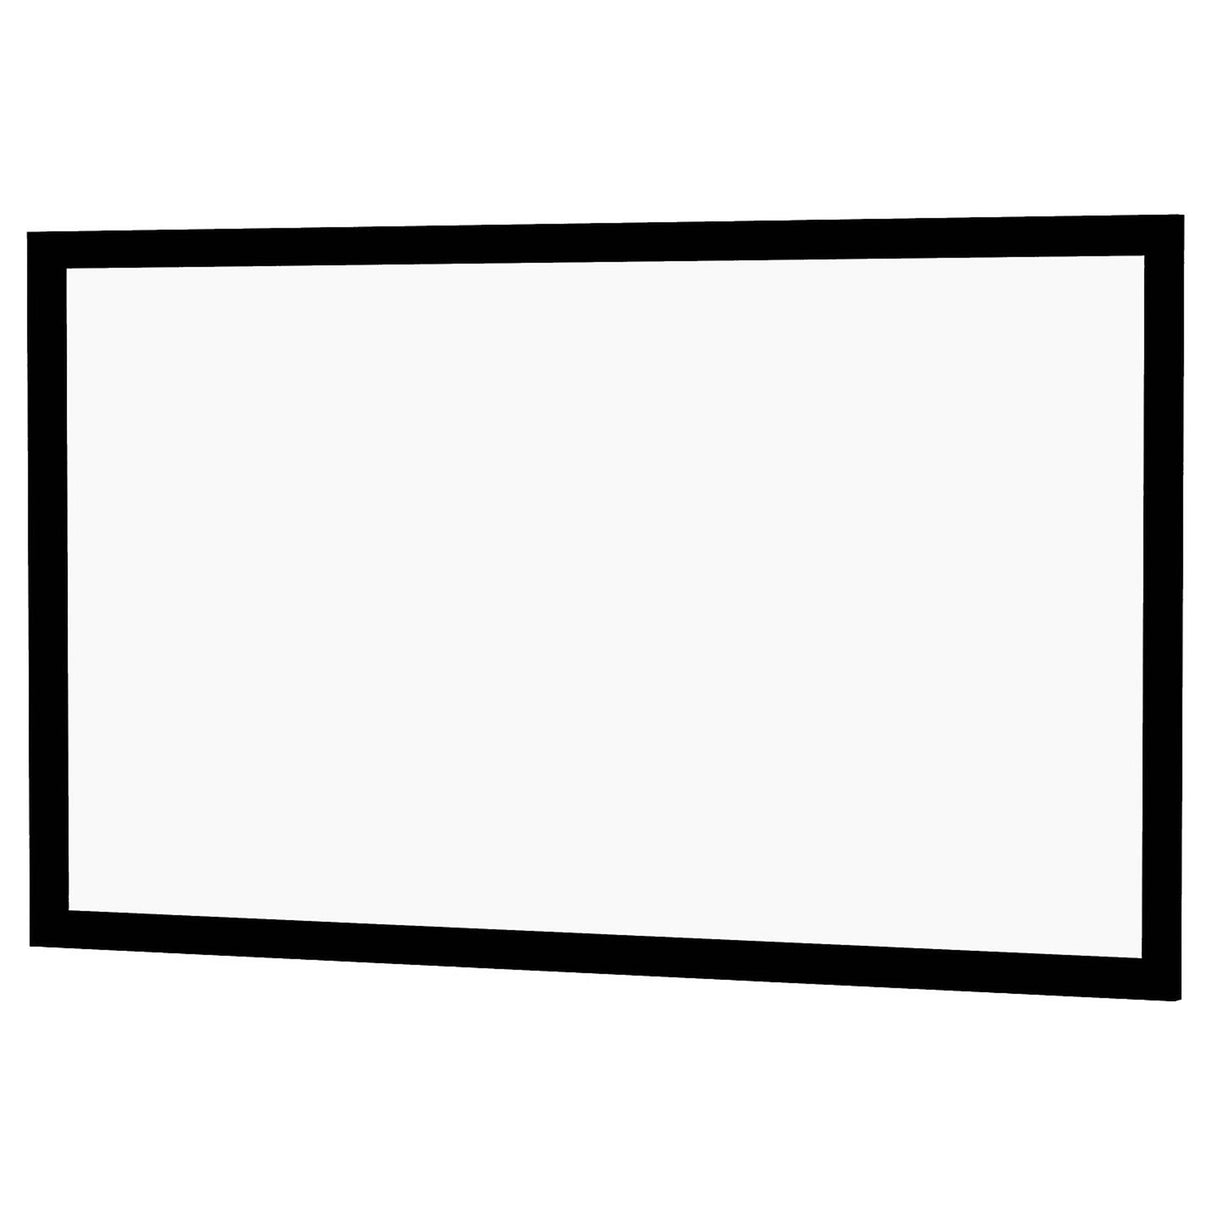 Prime Fixed-frame projector screen with acoustically transparent perforated white fabric (200")